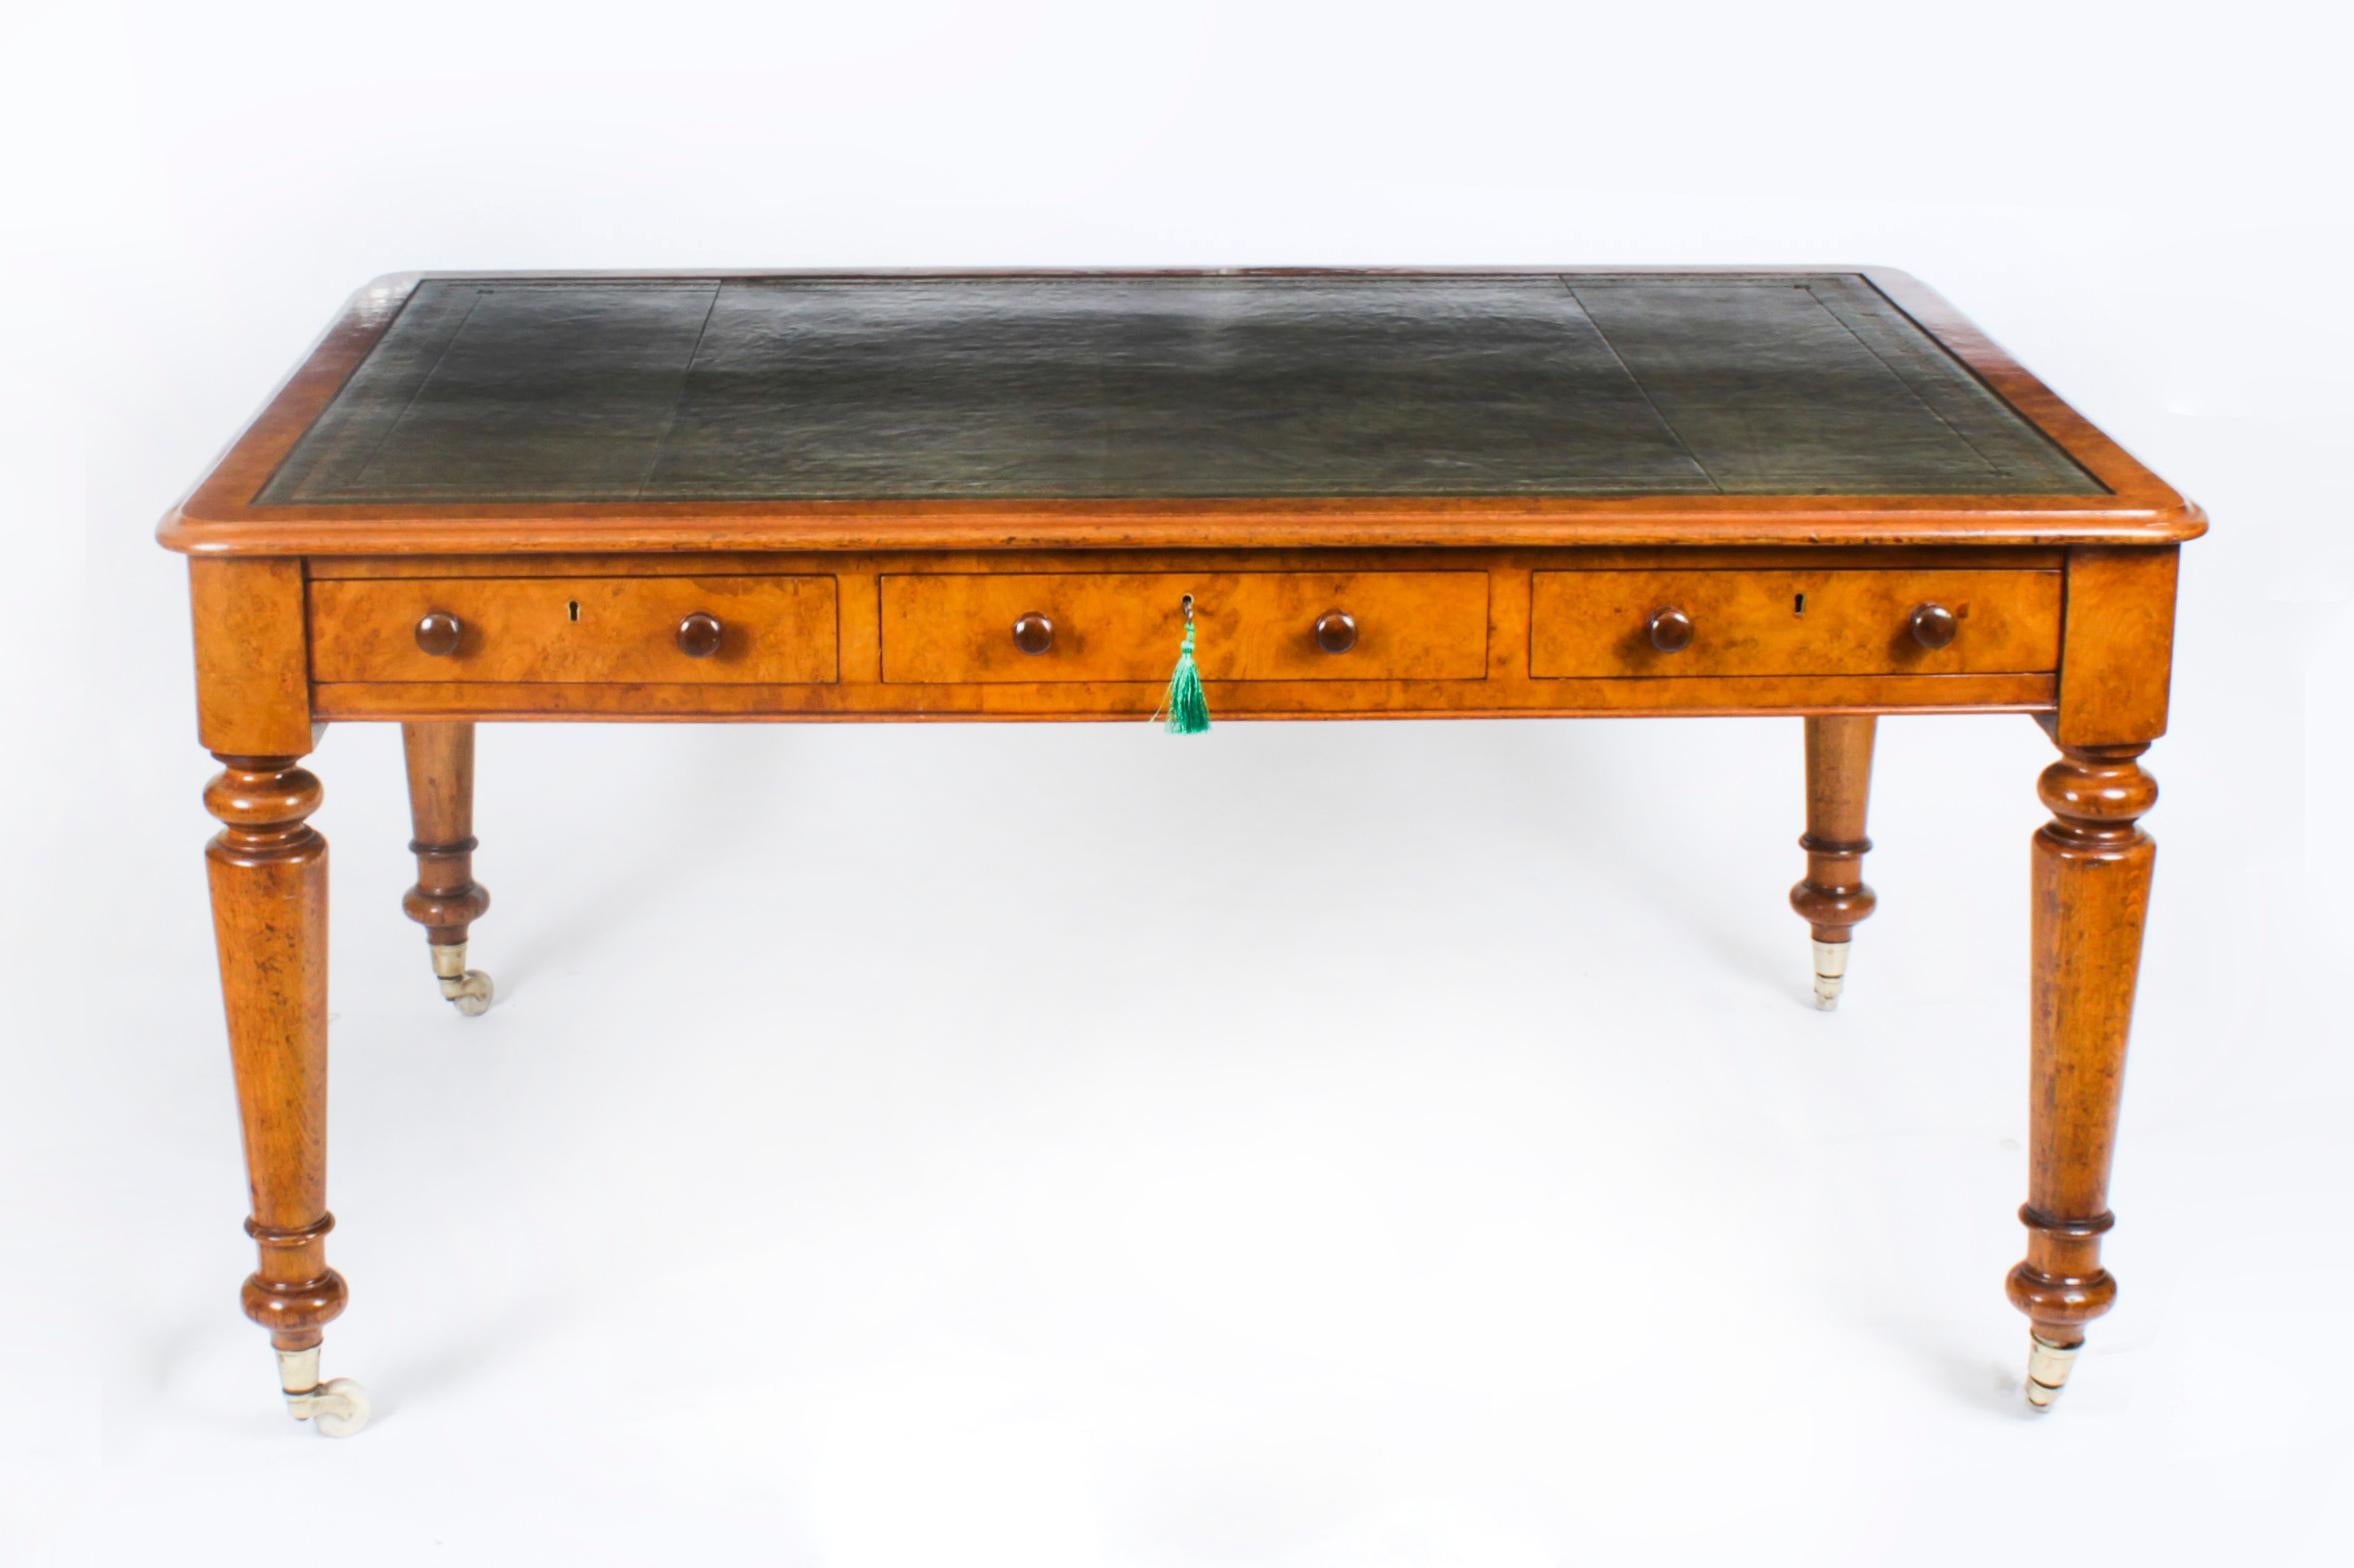 This gorgeous early Victorian antique Partners desk is crafted from beautiful pollard oak and dates from Circa 1850.
 
The rectangular top with rounded corners features a striking olive green inset leather writing surface that has beautiful hand